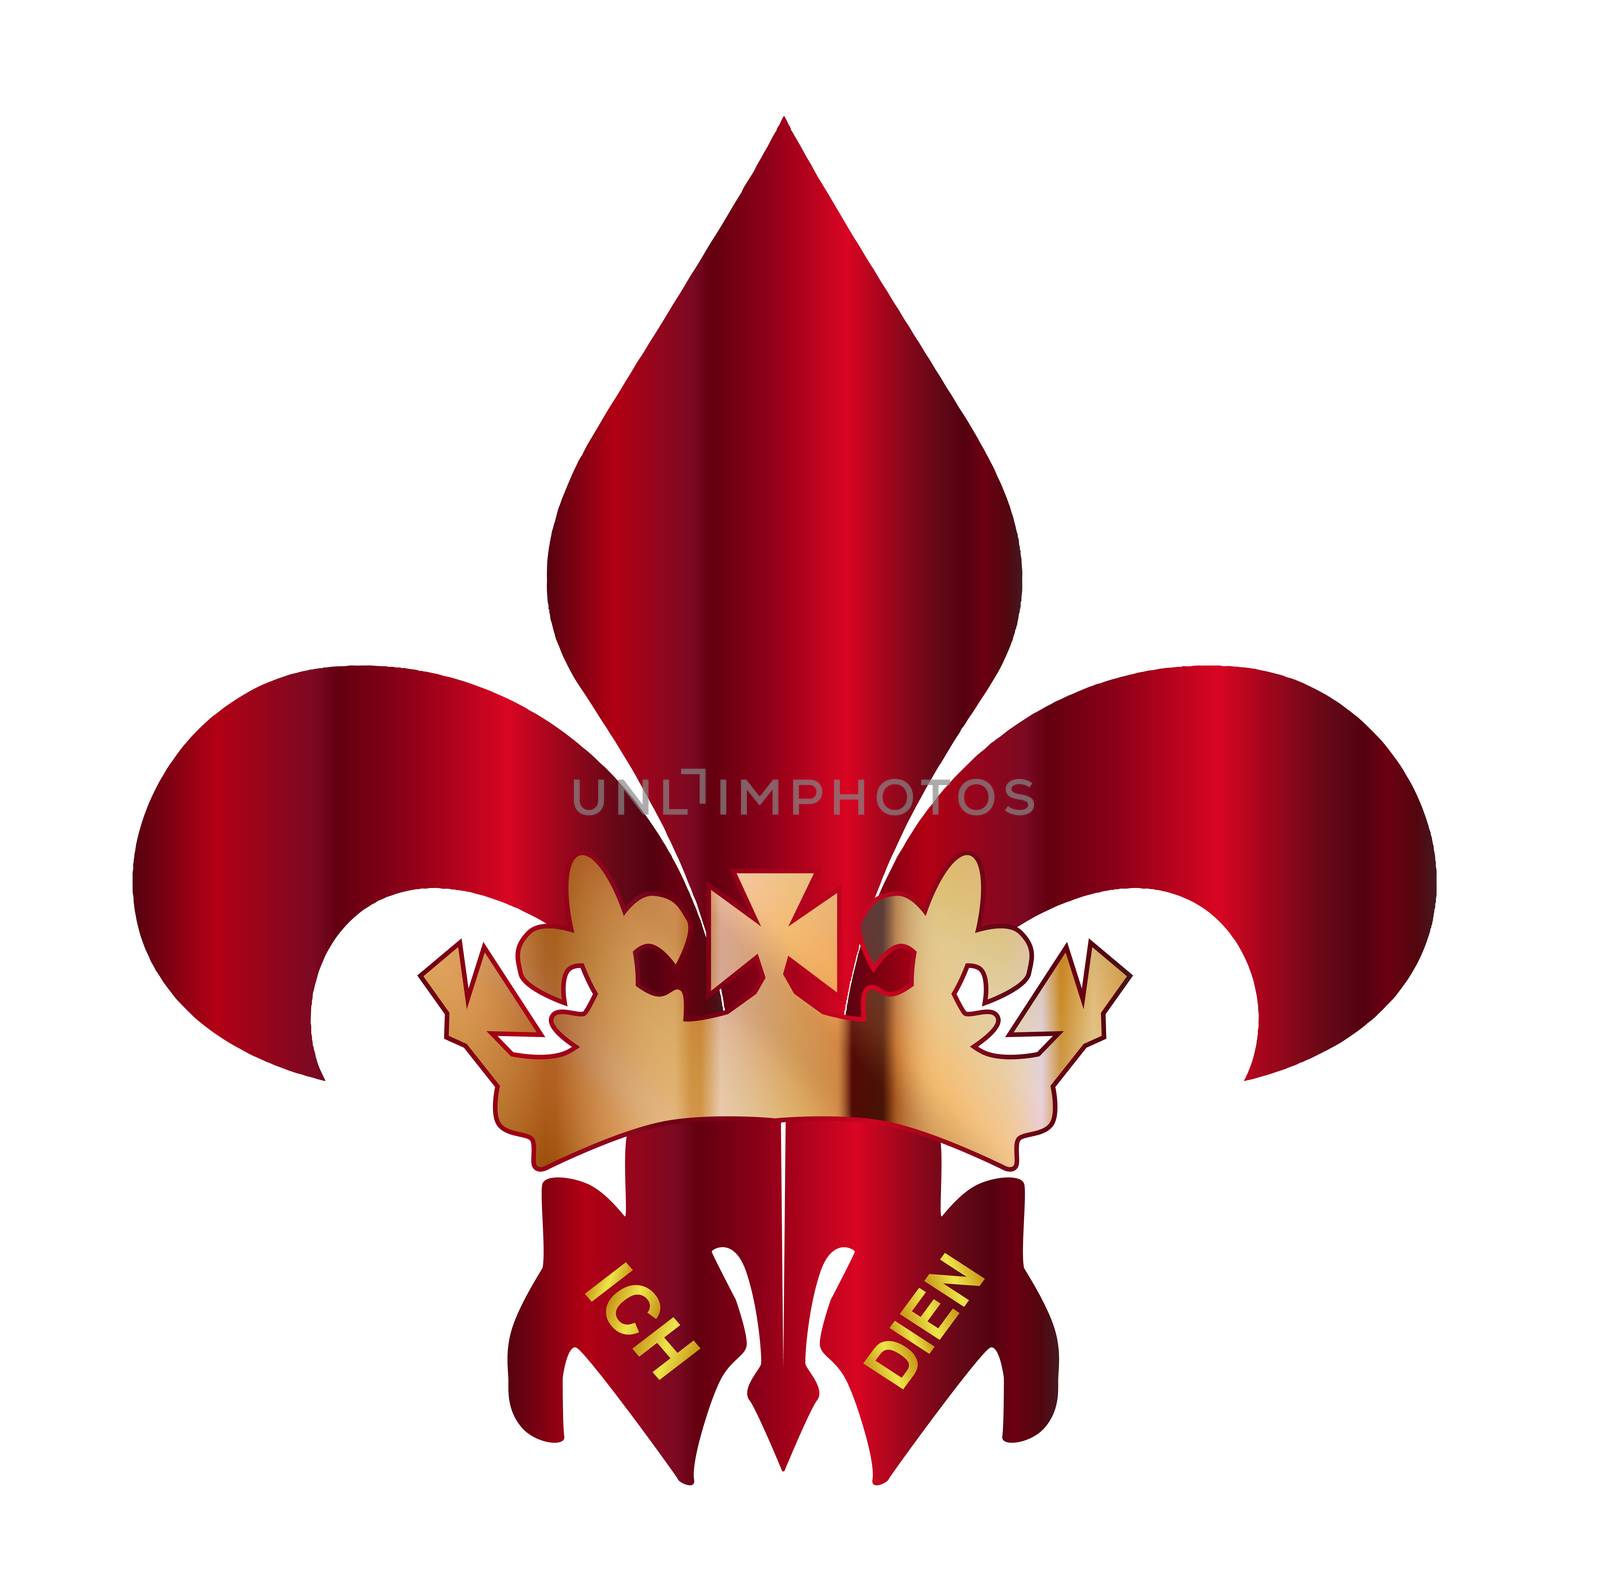 The traditional Fleur de Lis or three feathers symbol, or Prince ofWales's feathers